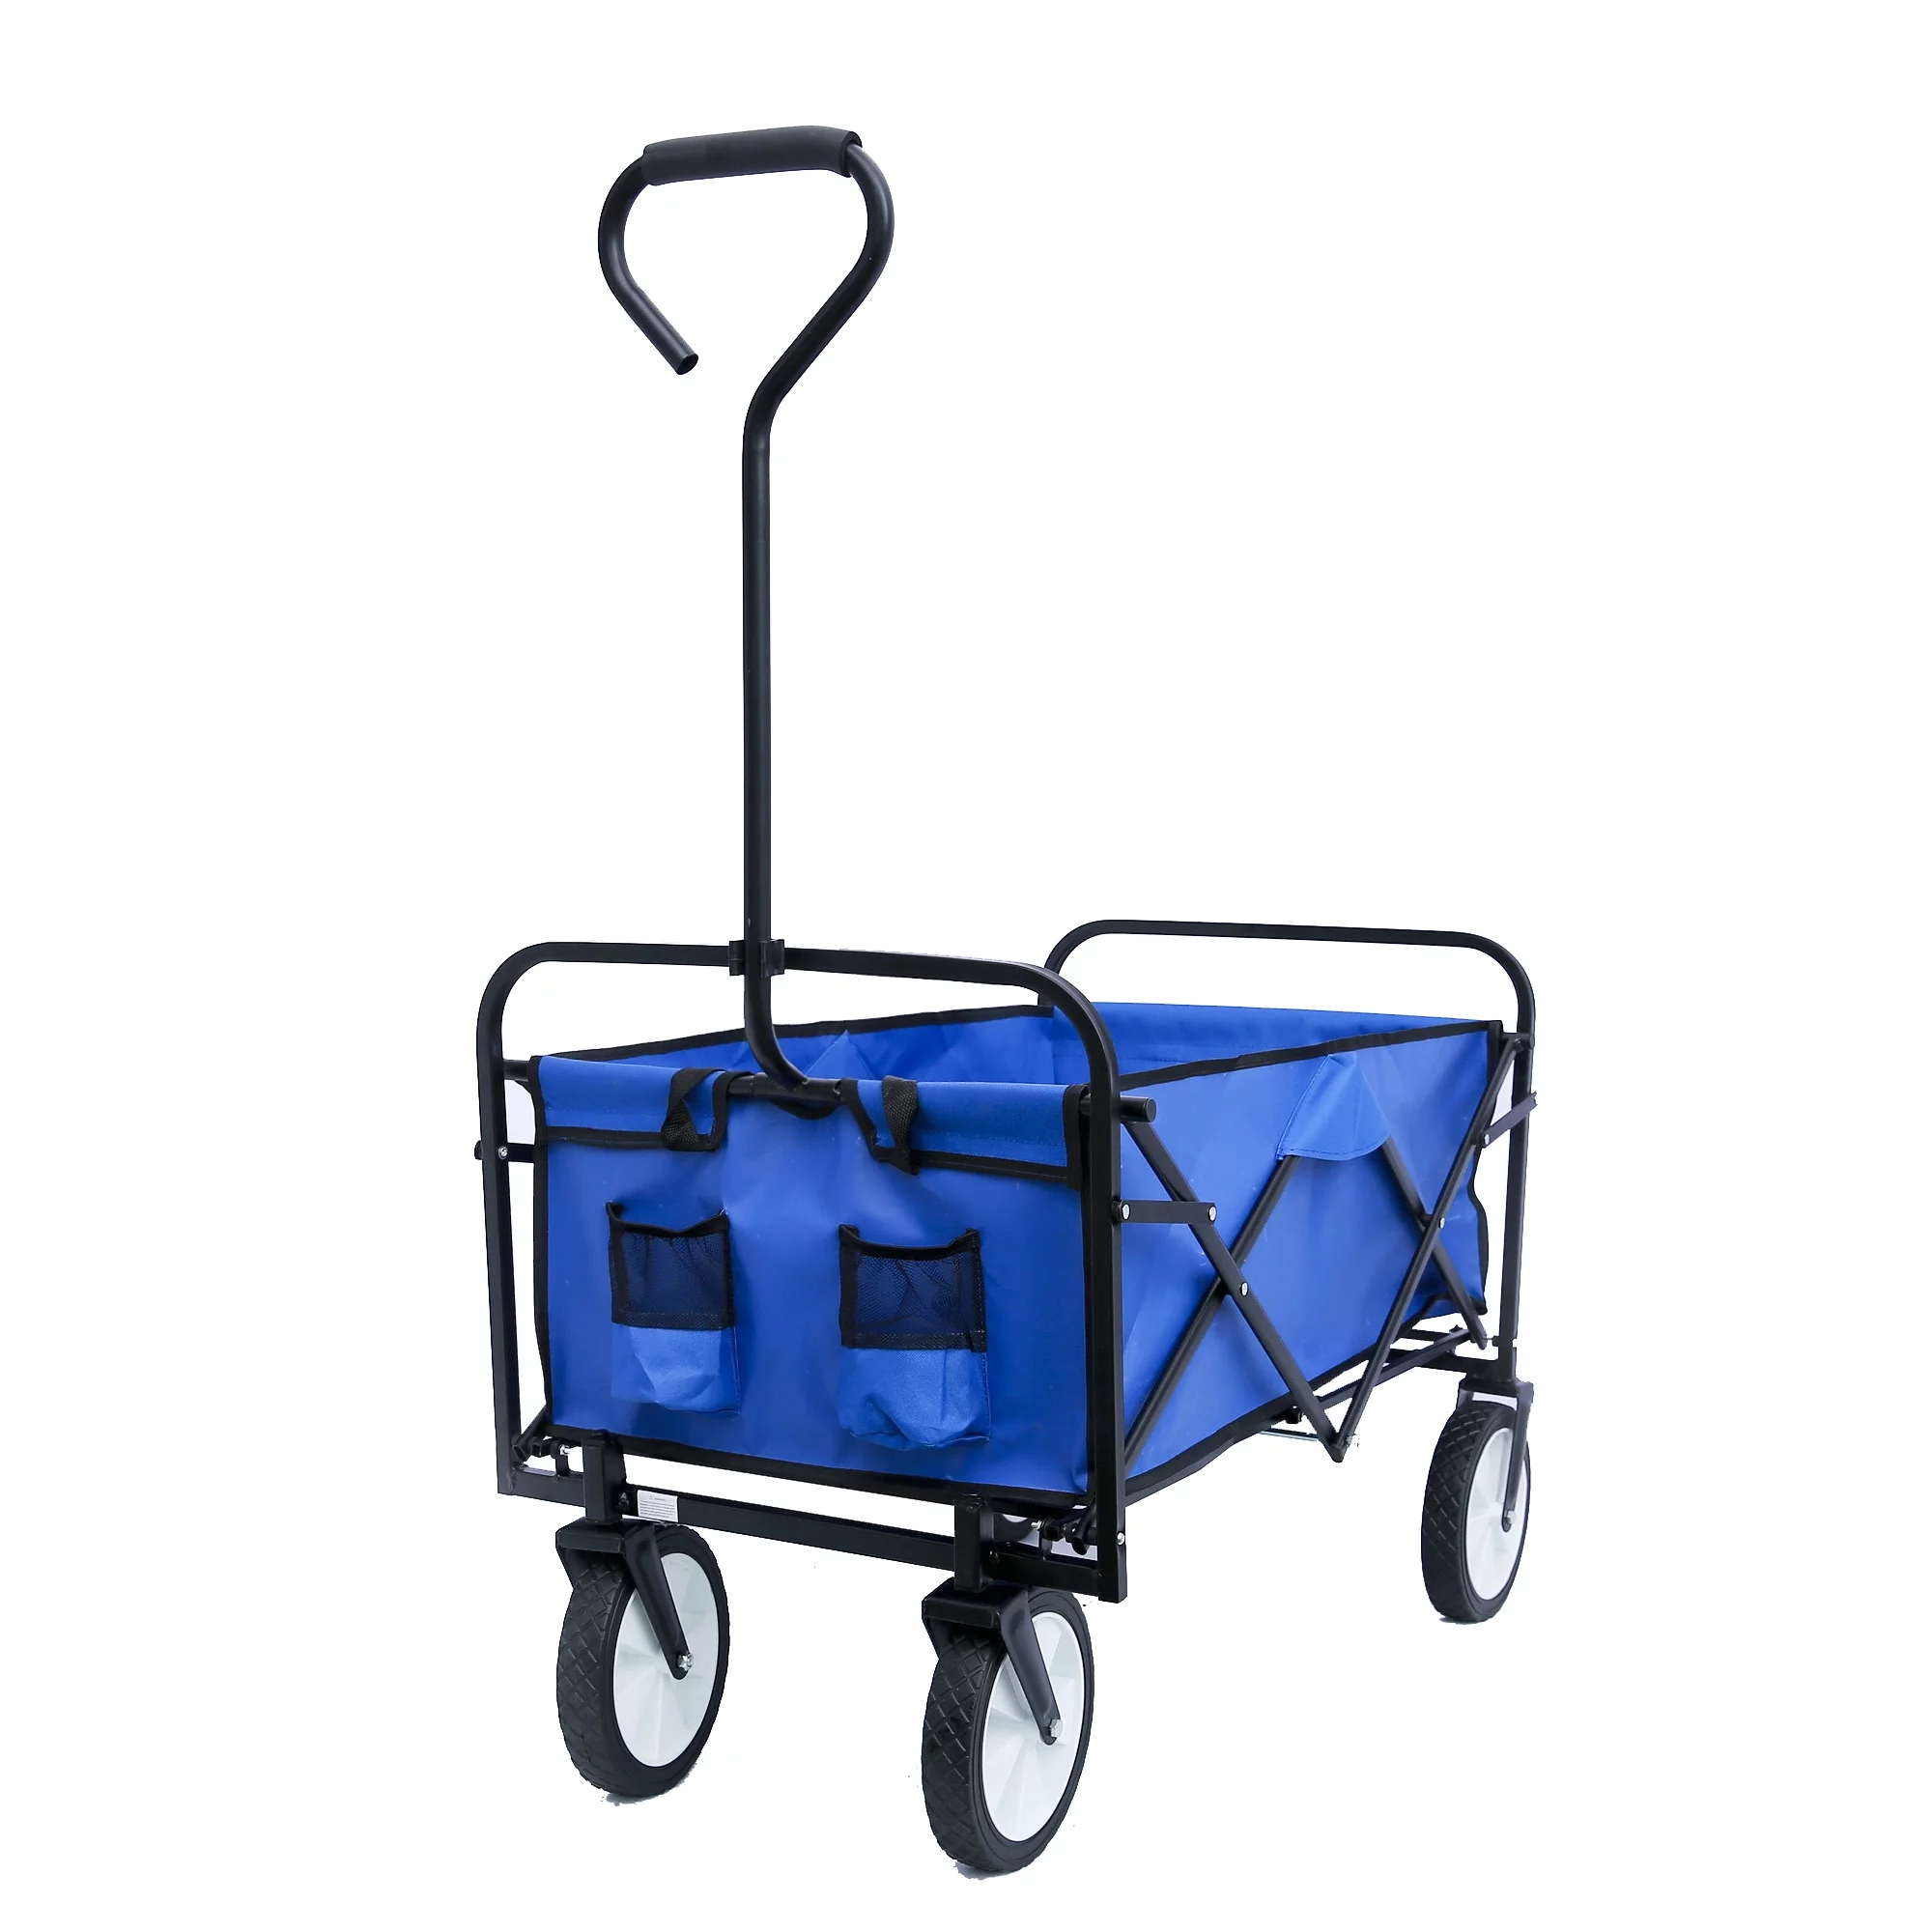 Beach Wagon, Collapsible Wagon with Adjustable Handle, Steel Frame 600D Oxford Cloth Grocery Cart with Wheels, Fold Up Wagon with 2 Mesh Cup Holders for Garden Shopping Picnic Beach, Blue, Q3801